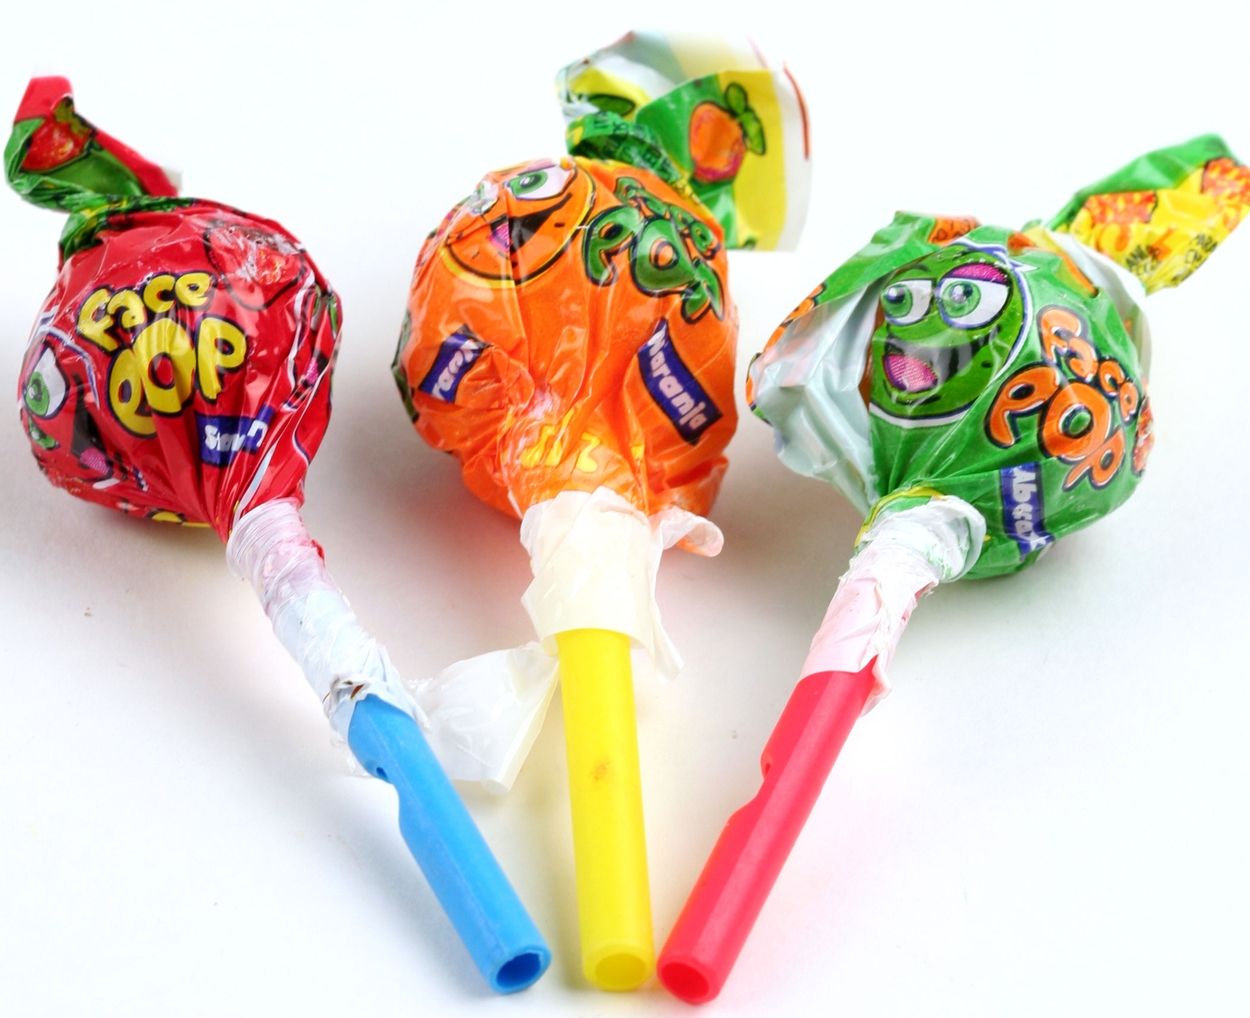 10 Candies That Made No Sense To You When You Were Younger, But You Ate Them Anyway